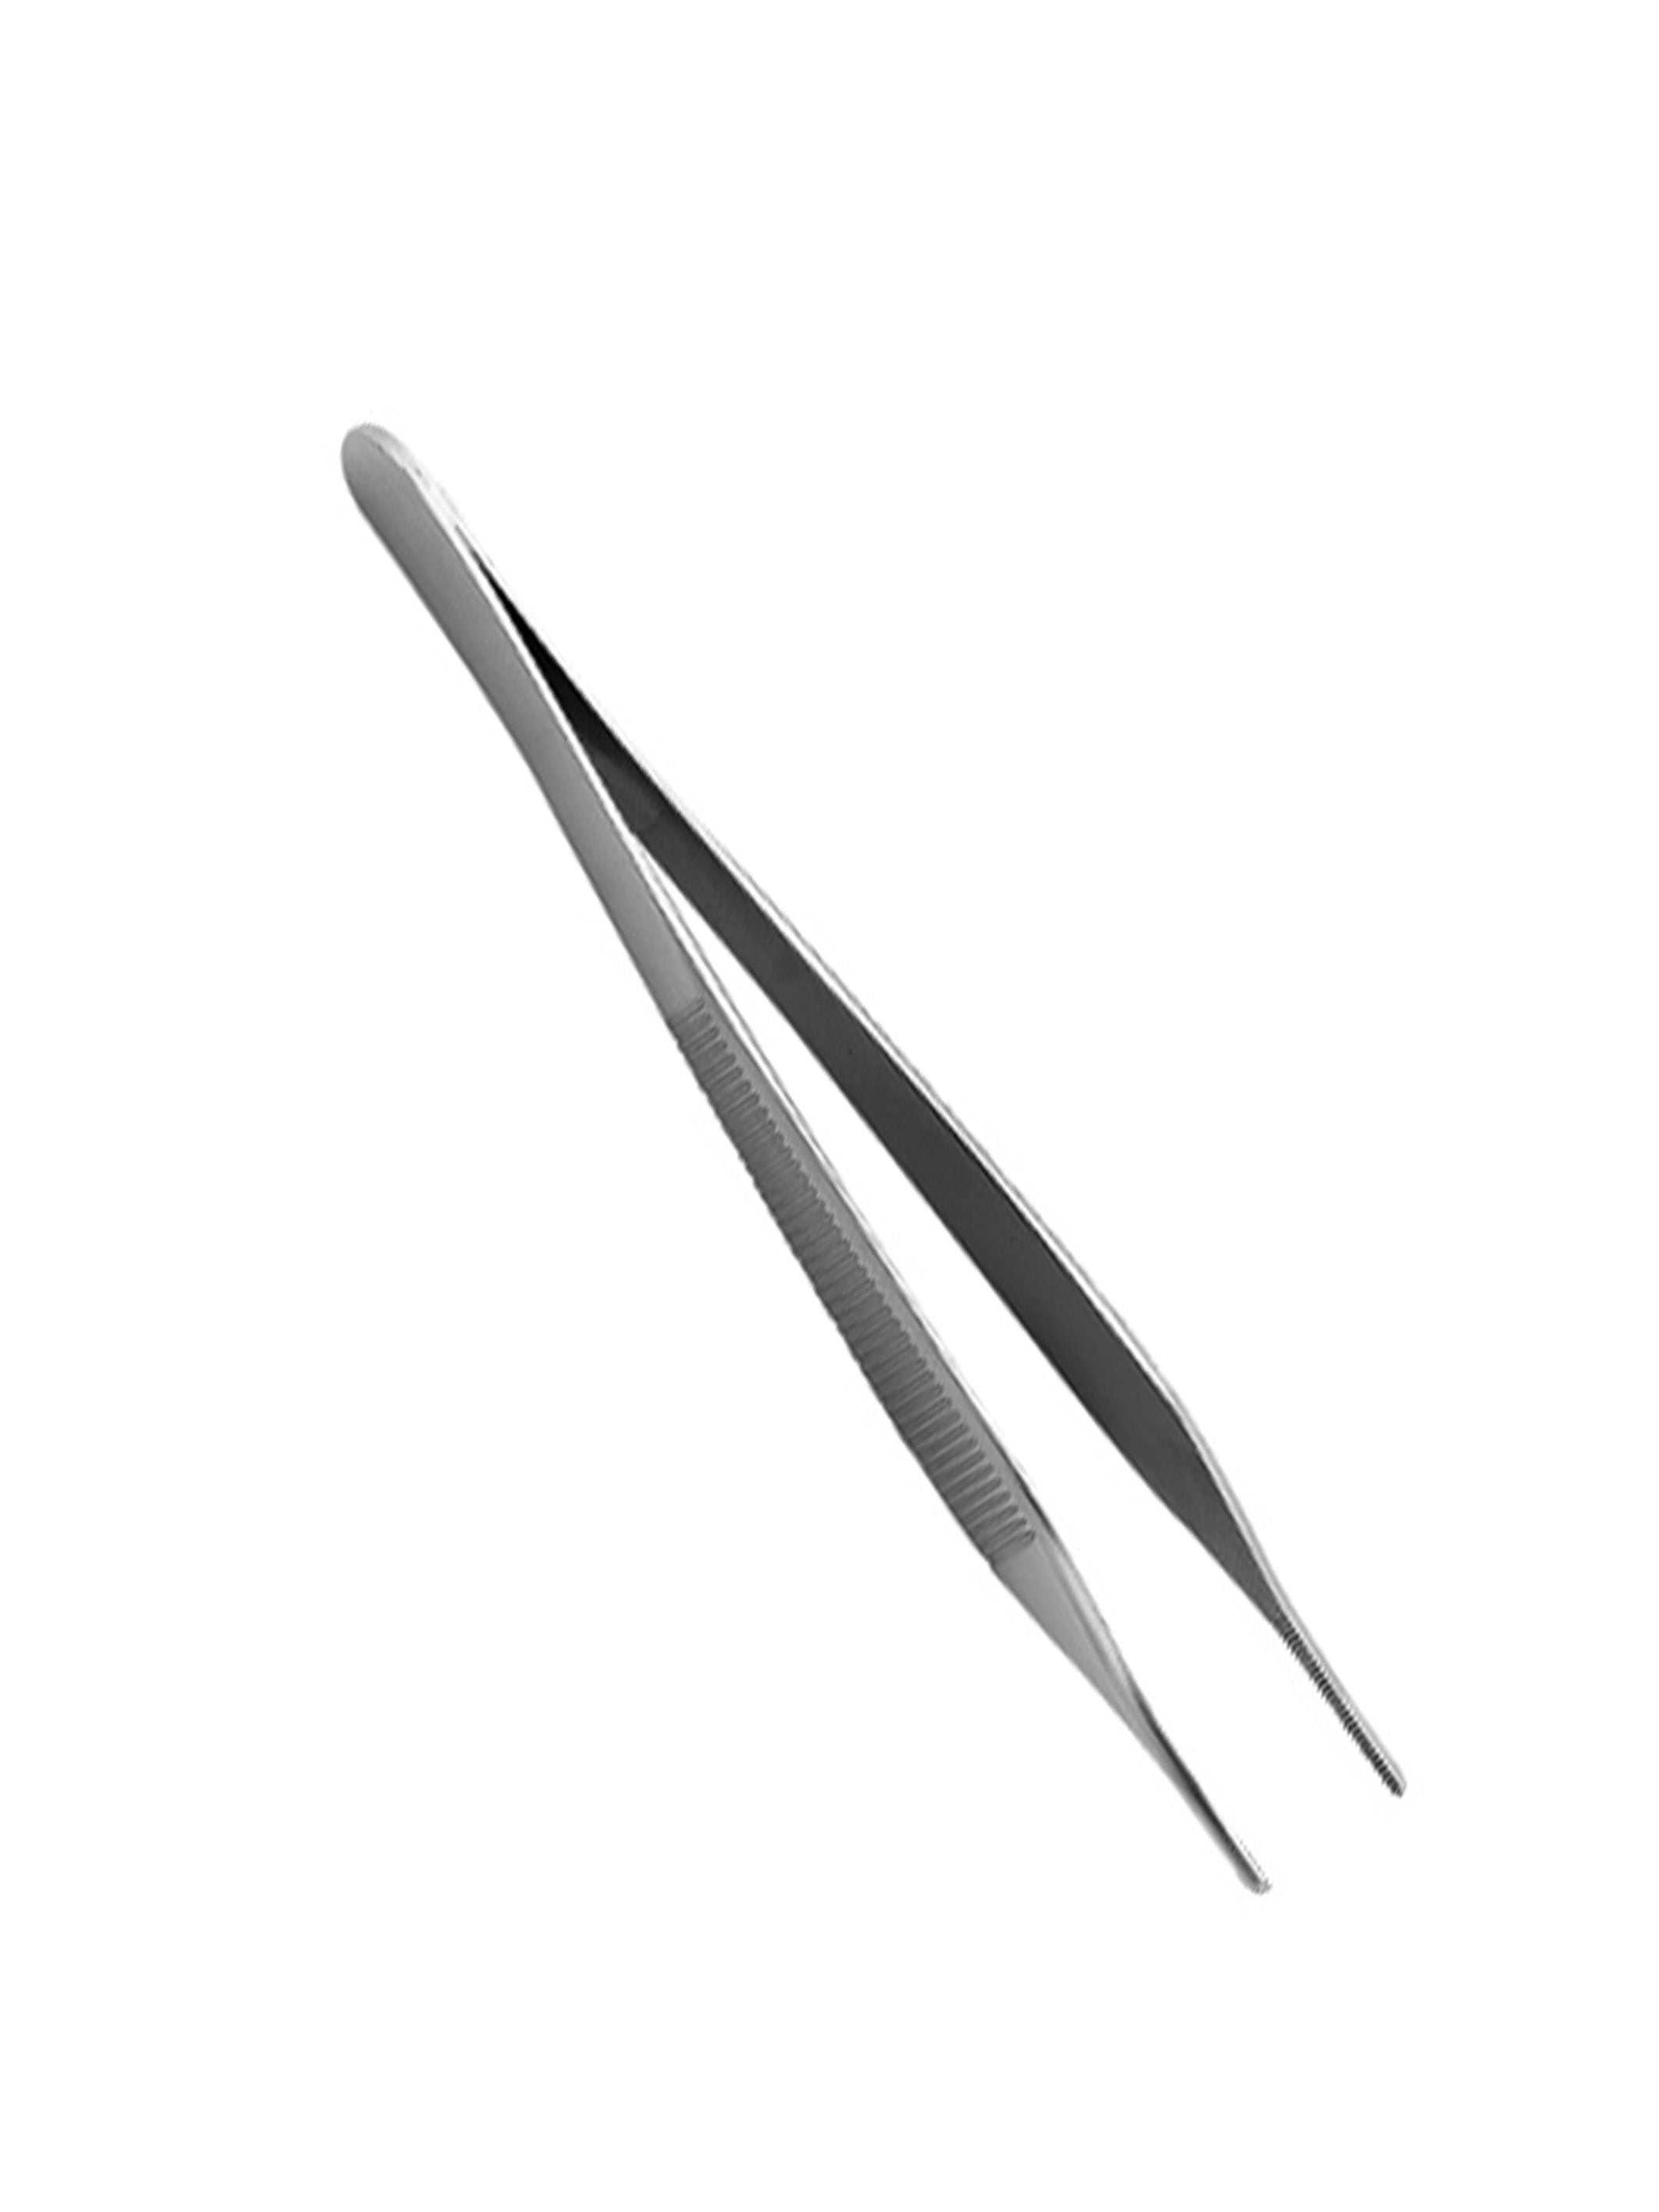 Dressing And Tissue Forceps